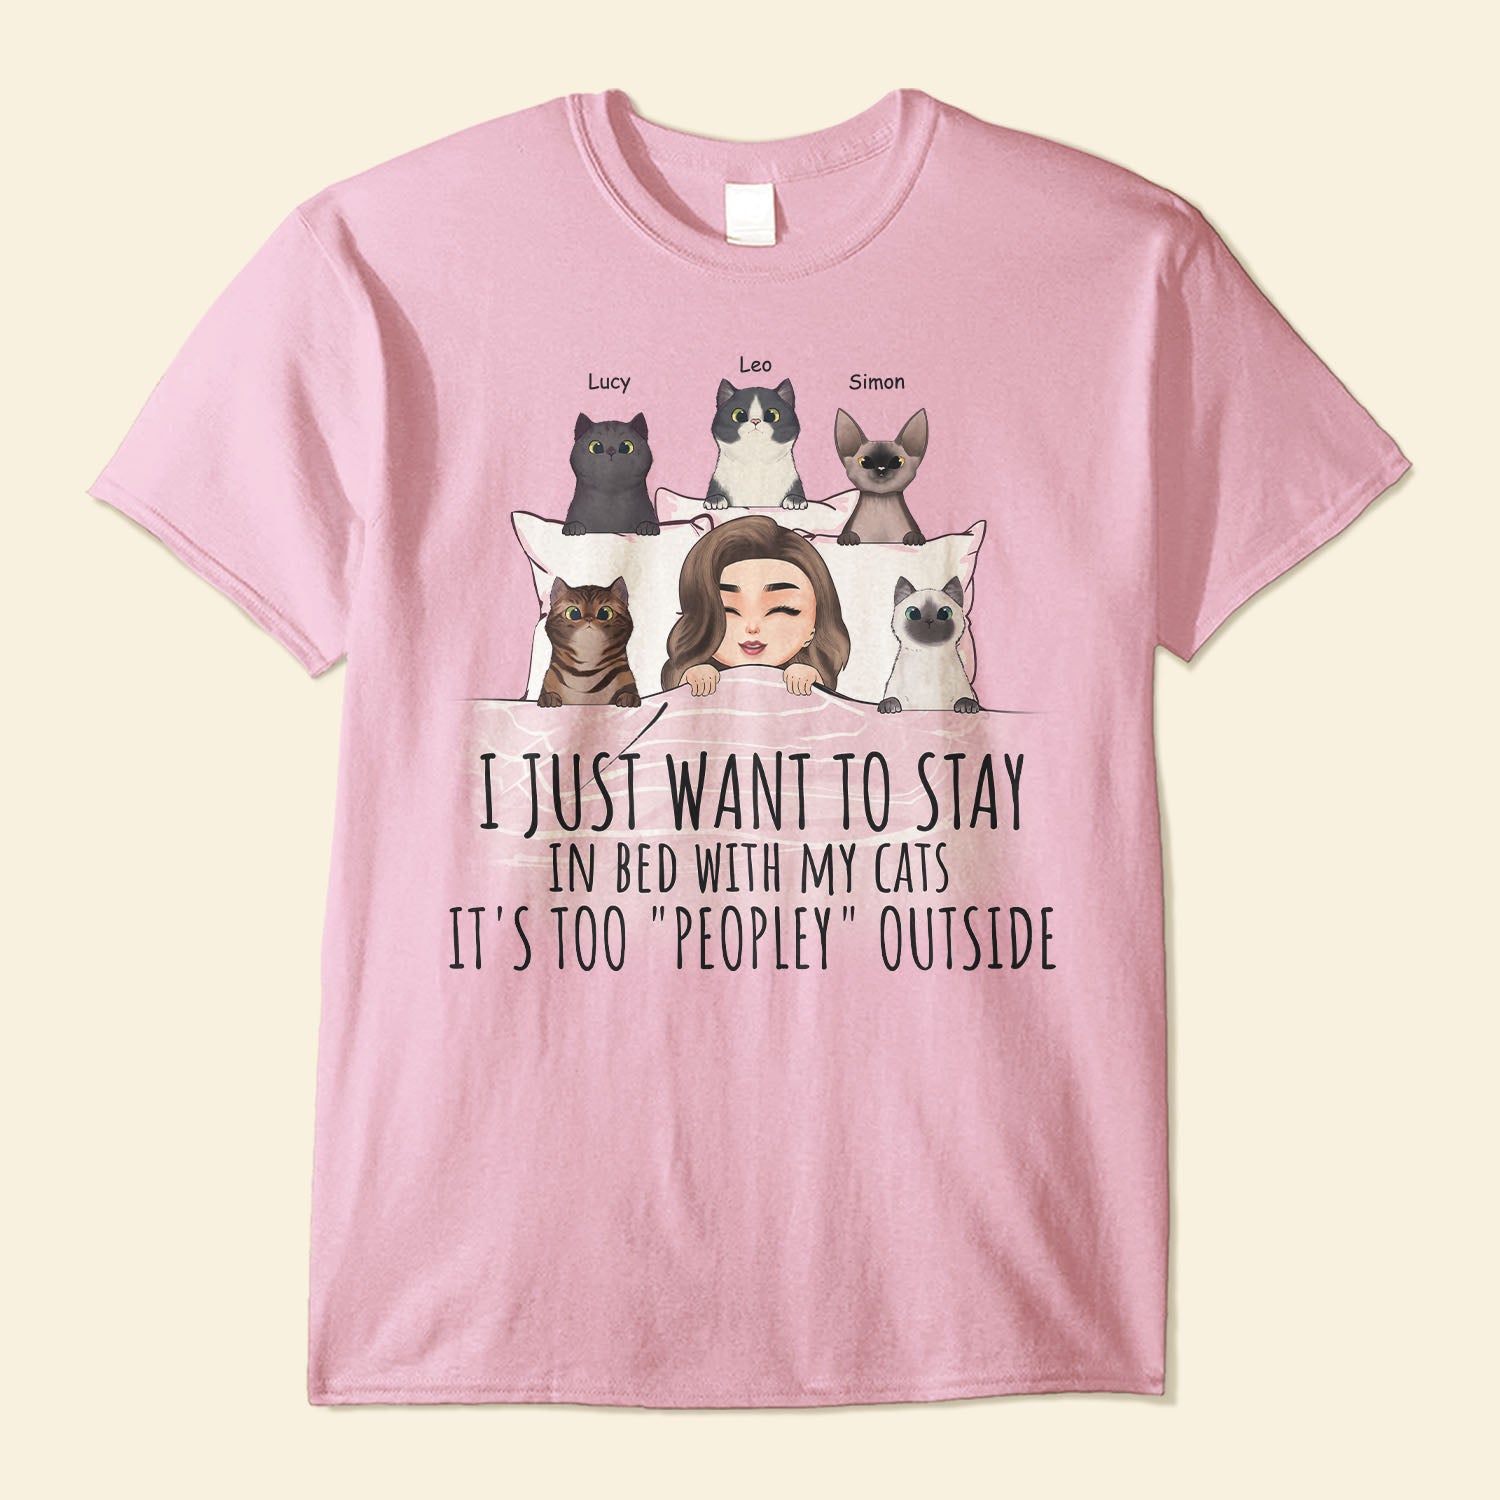 Stay In Bed With My Cats - Personalized Shirt - Birthday Gift For Cat Lover